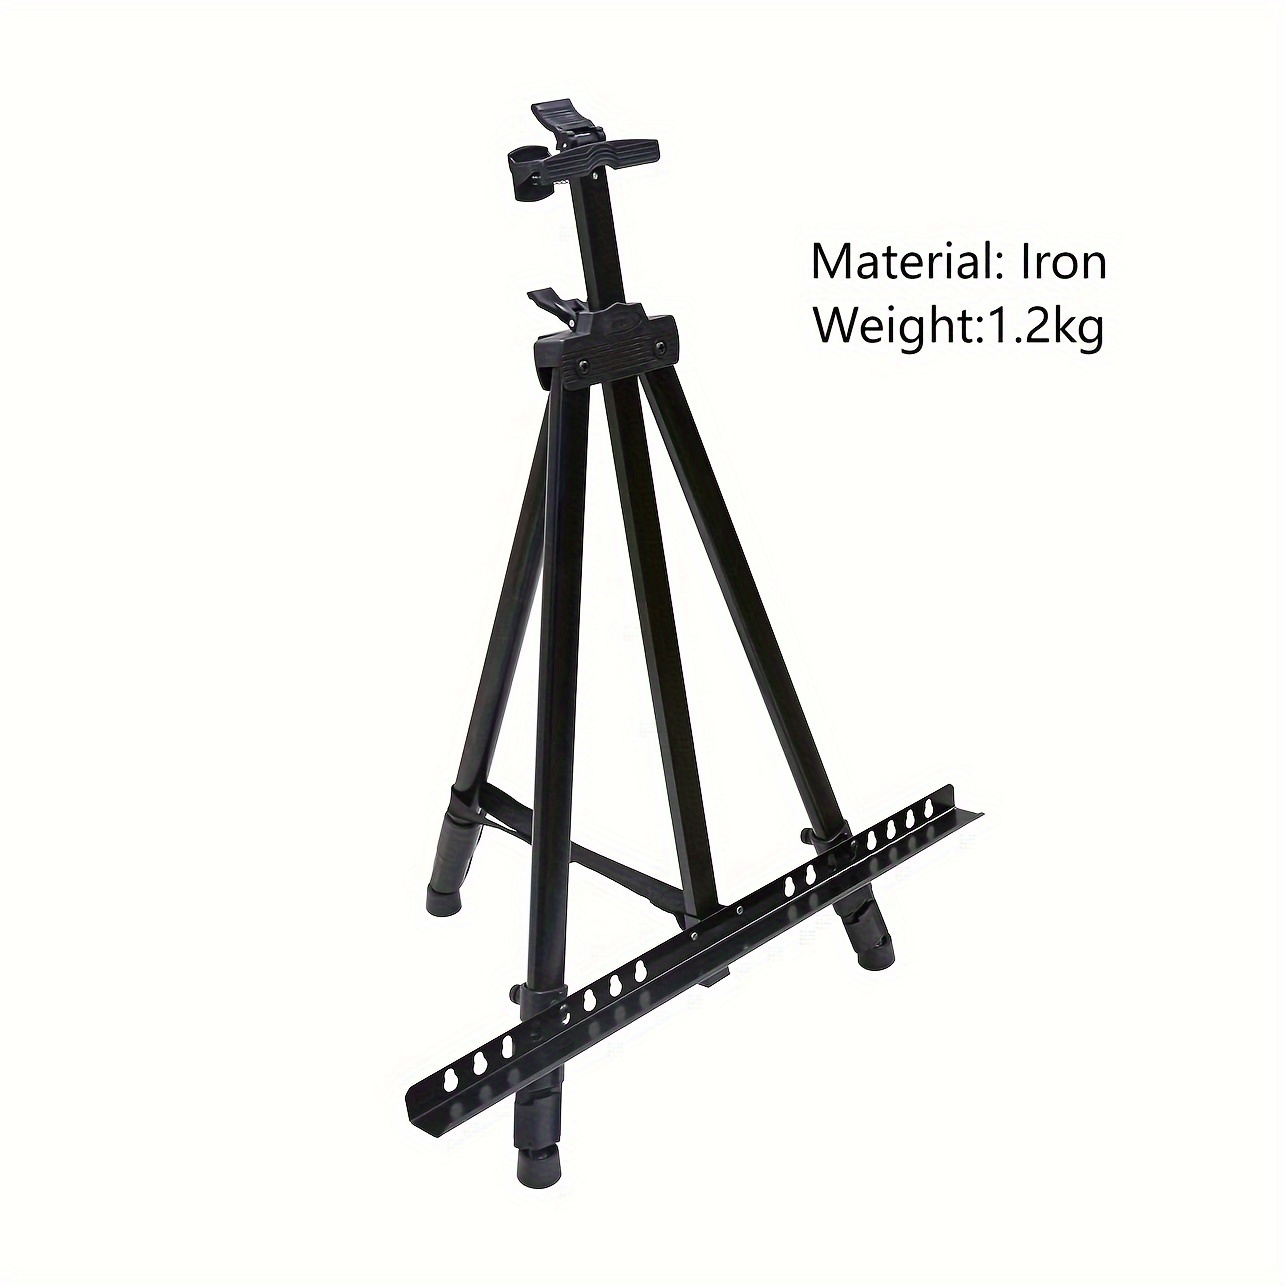 65 tall Metal Easel Collapsible Tripod Stand - Black